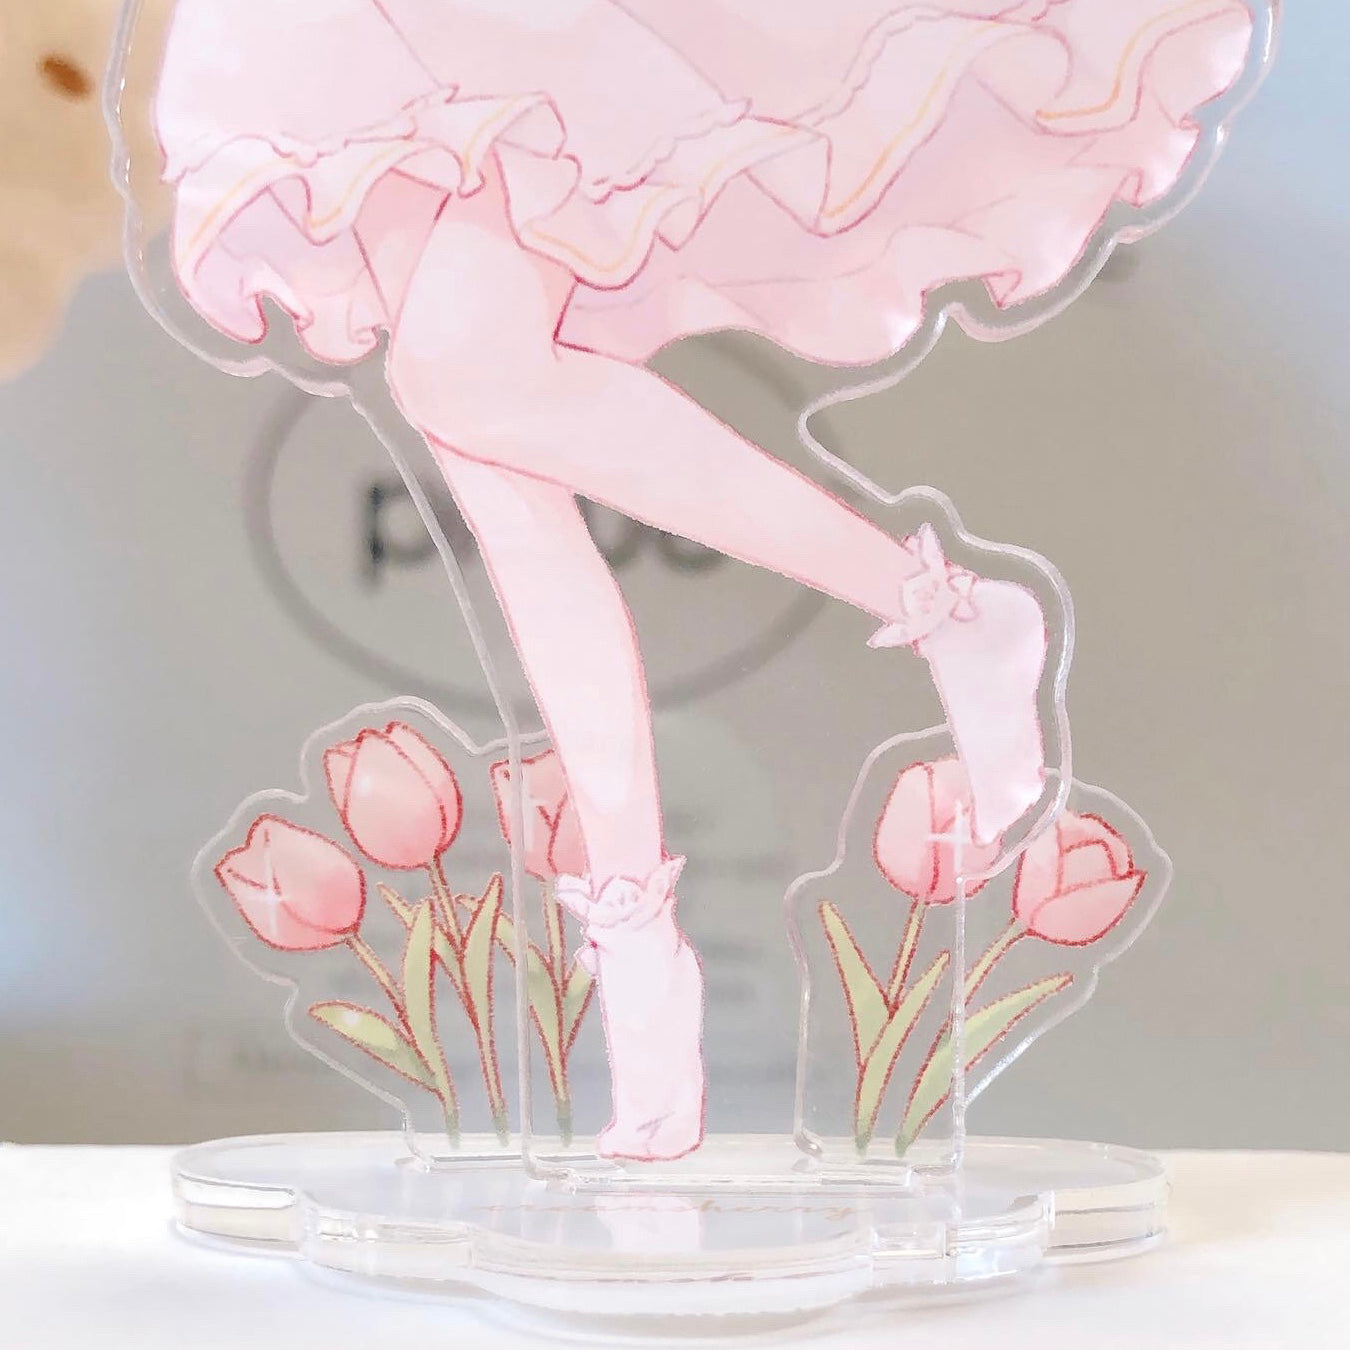 garden in the sky acrylic stand 🌷